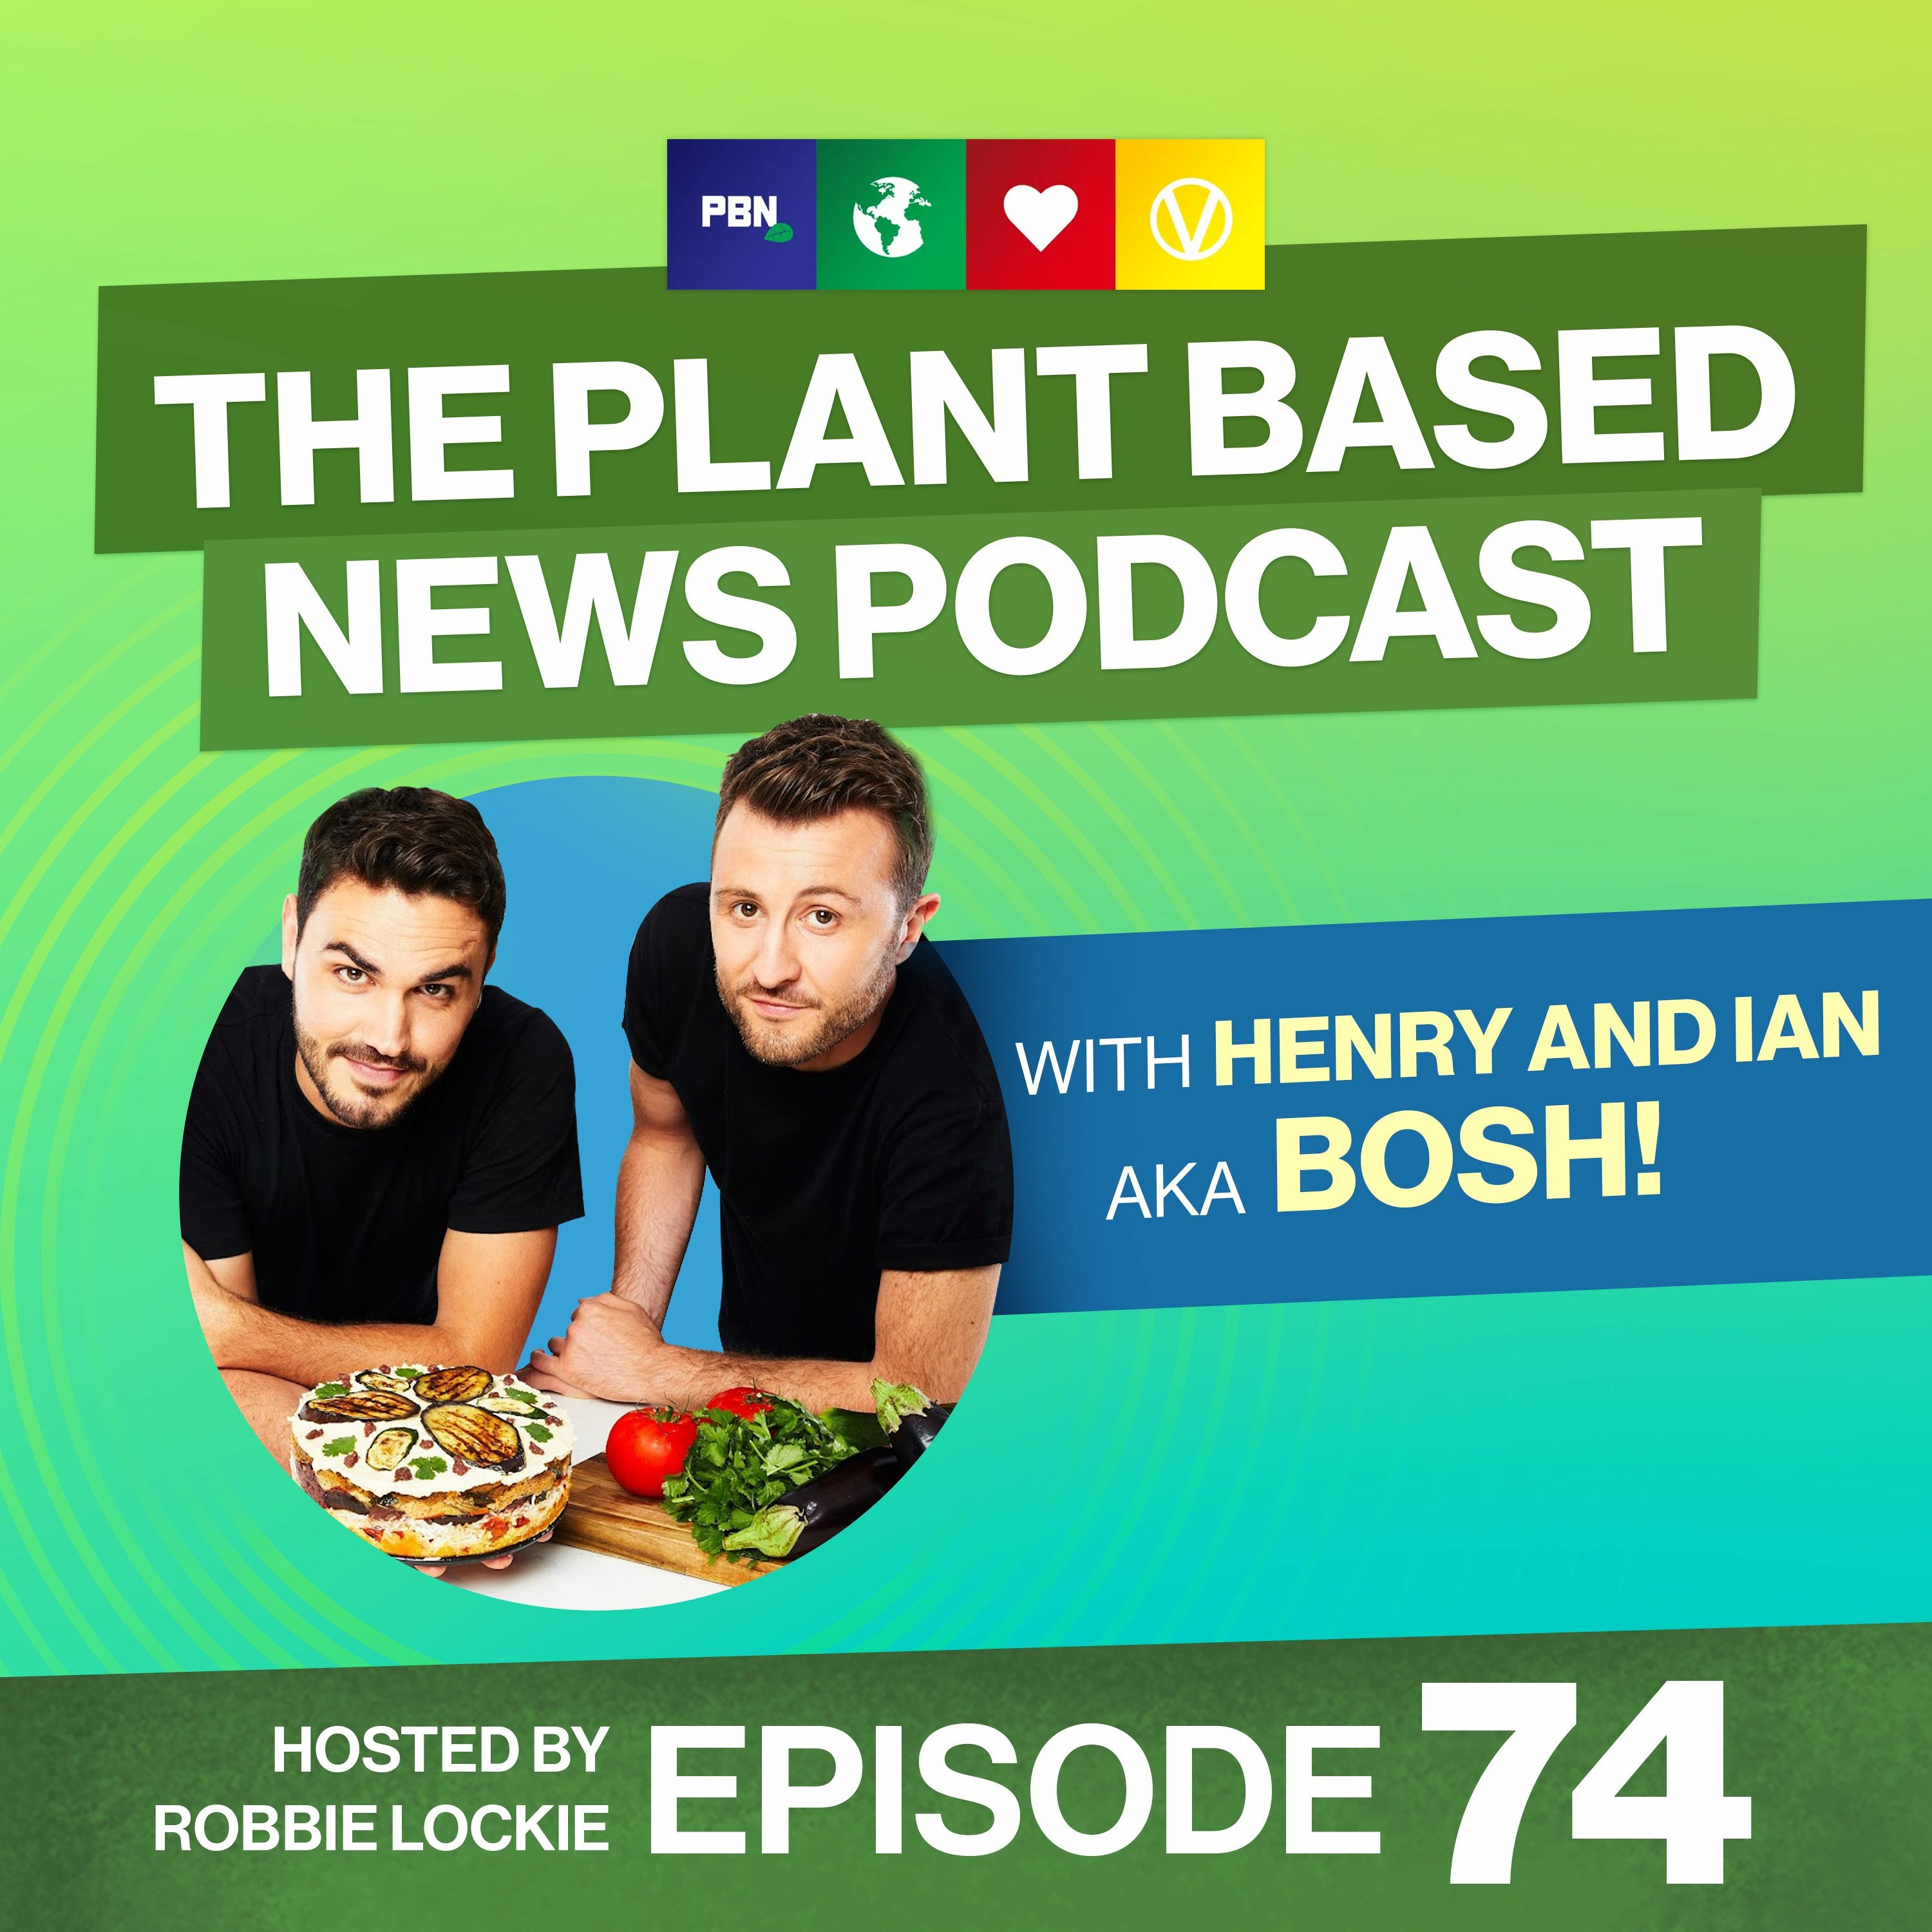 'Making Veganism Mainstream' Interview with Henry Frith & Ian Theasby from BOSH! / Episode 74